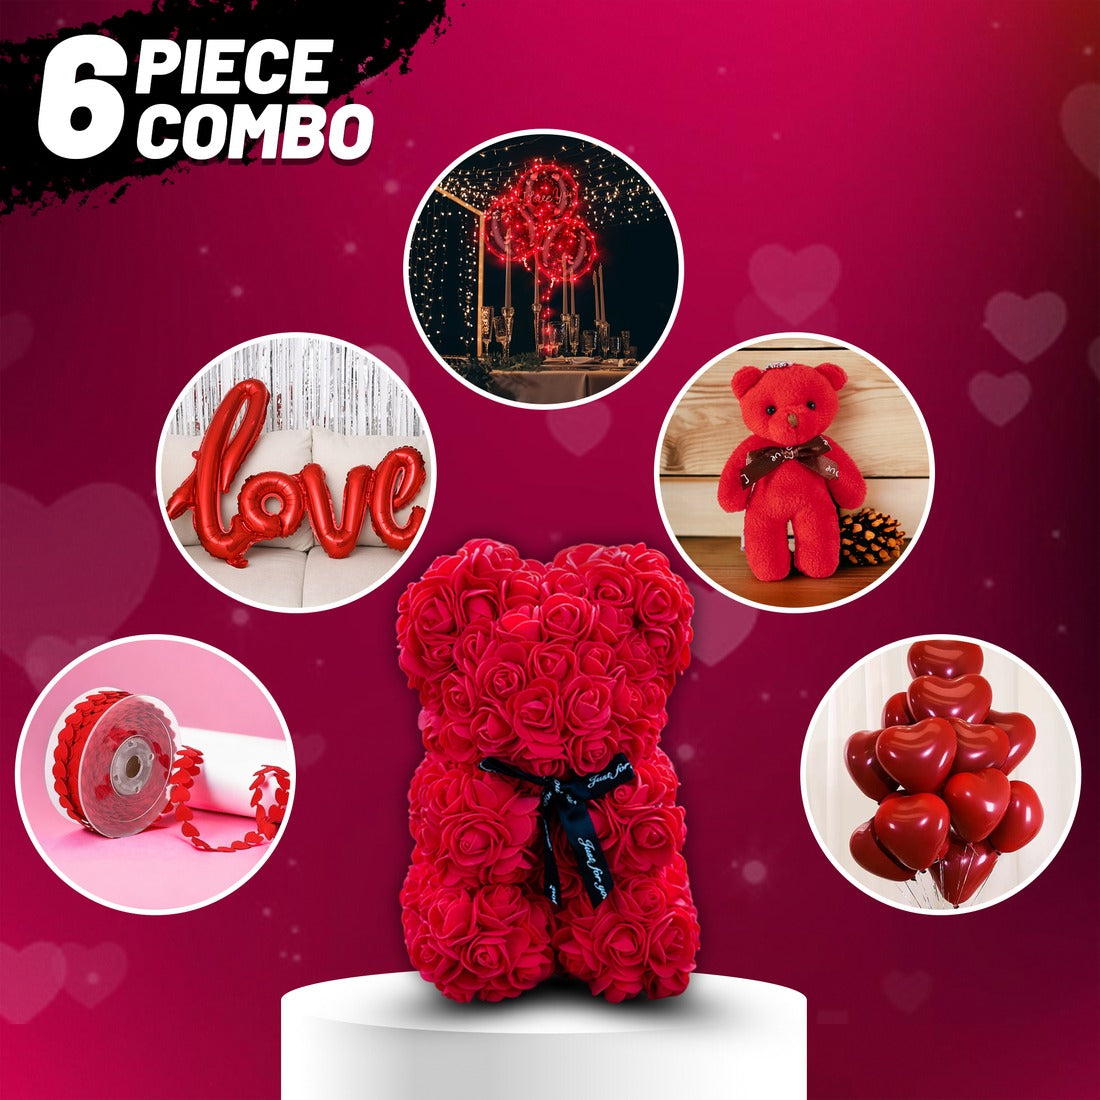 Romantic Valentine's Day 6 piece Gifts Combo Offer Zaappy